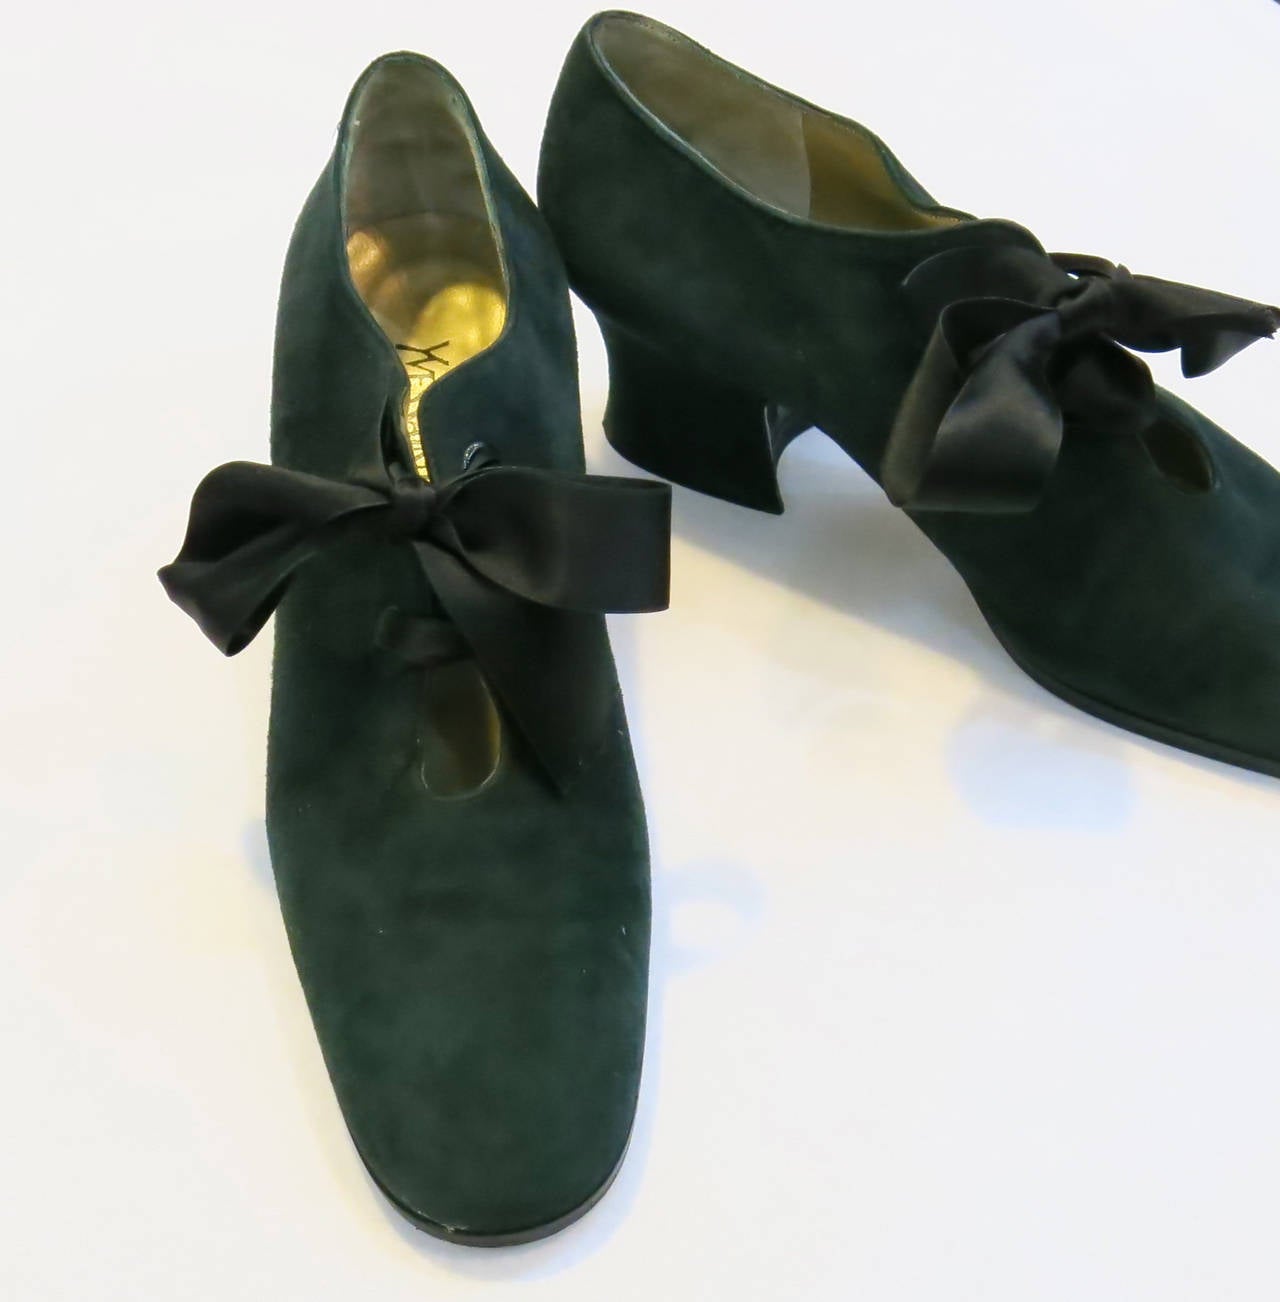 These Yves Saint Laurent forest green suede heels are constructed in an Edwardian Style and tie with black satin ribbon. 

*Please contact dealer prior to purchase for White Glove shipping options.